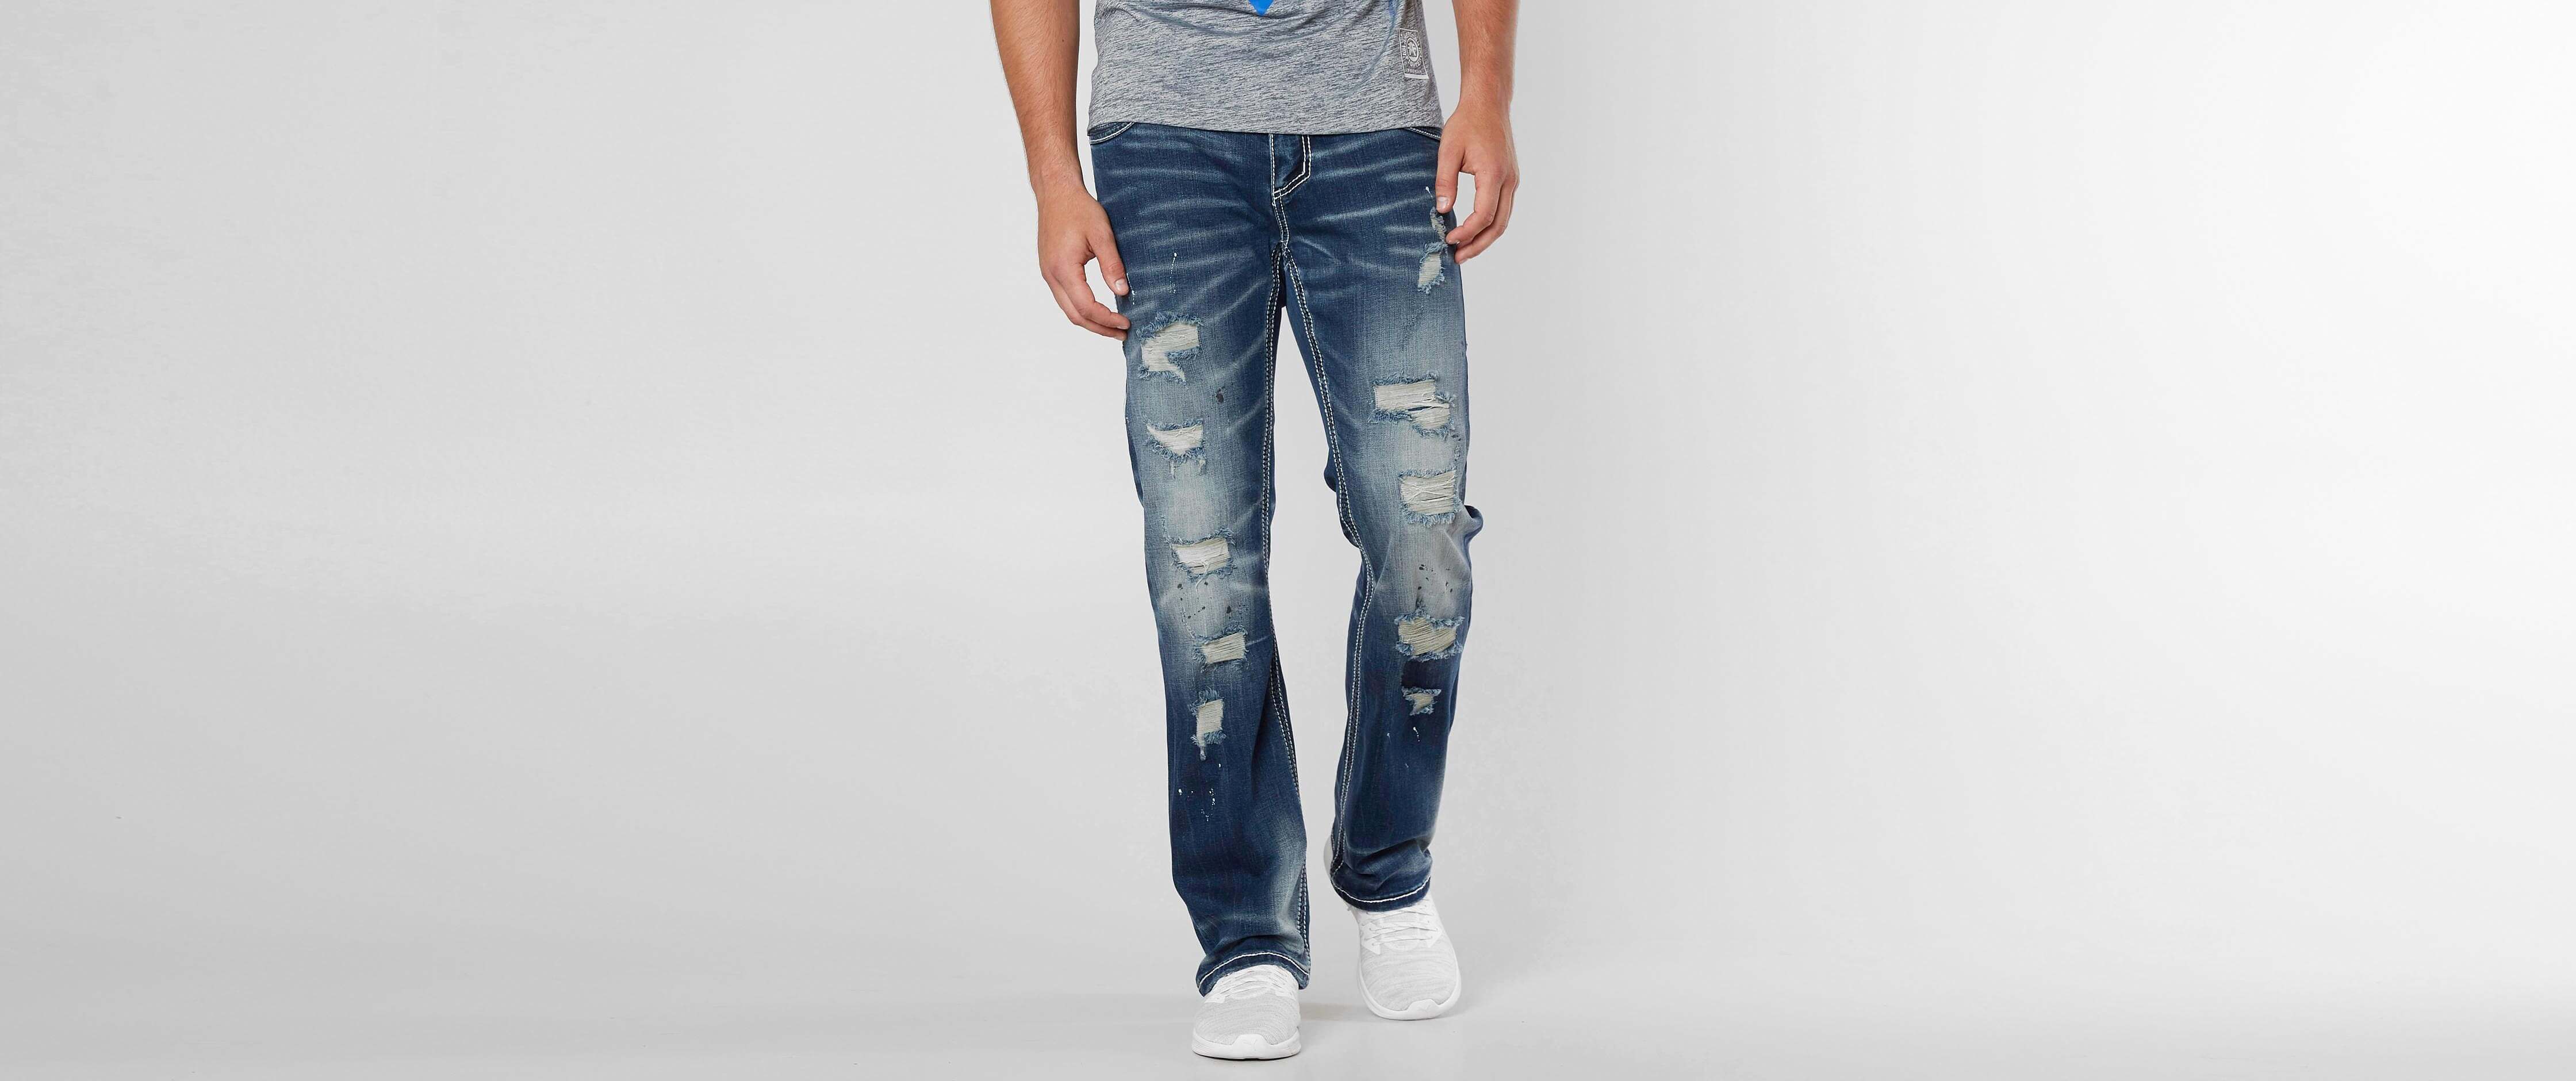 american fighter jeans cheap